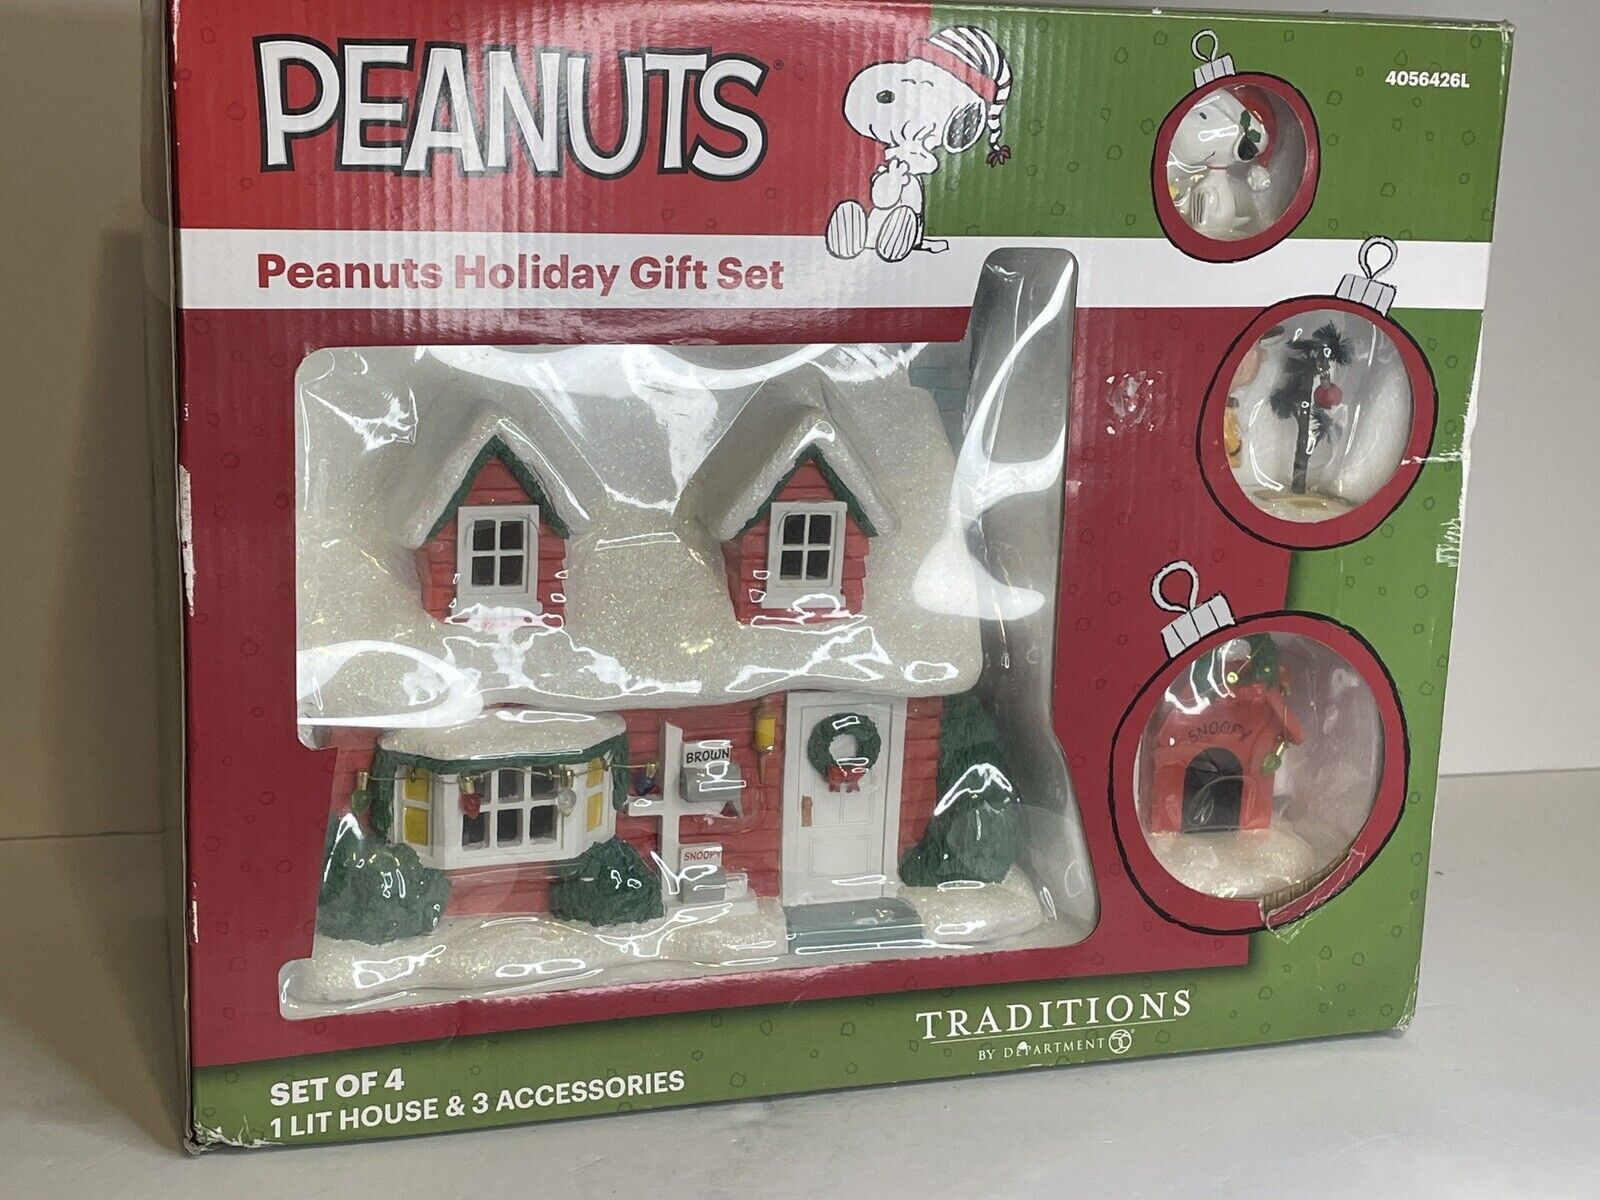 Dept 56 Peanuts Charlie Brown House Village Traditions Holiday Gift Set of 4